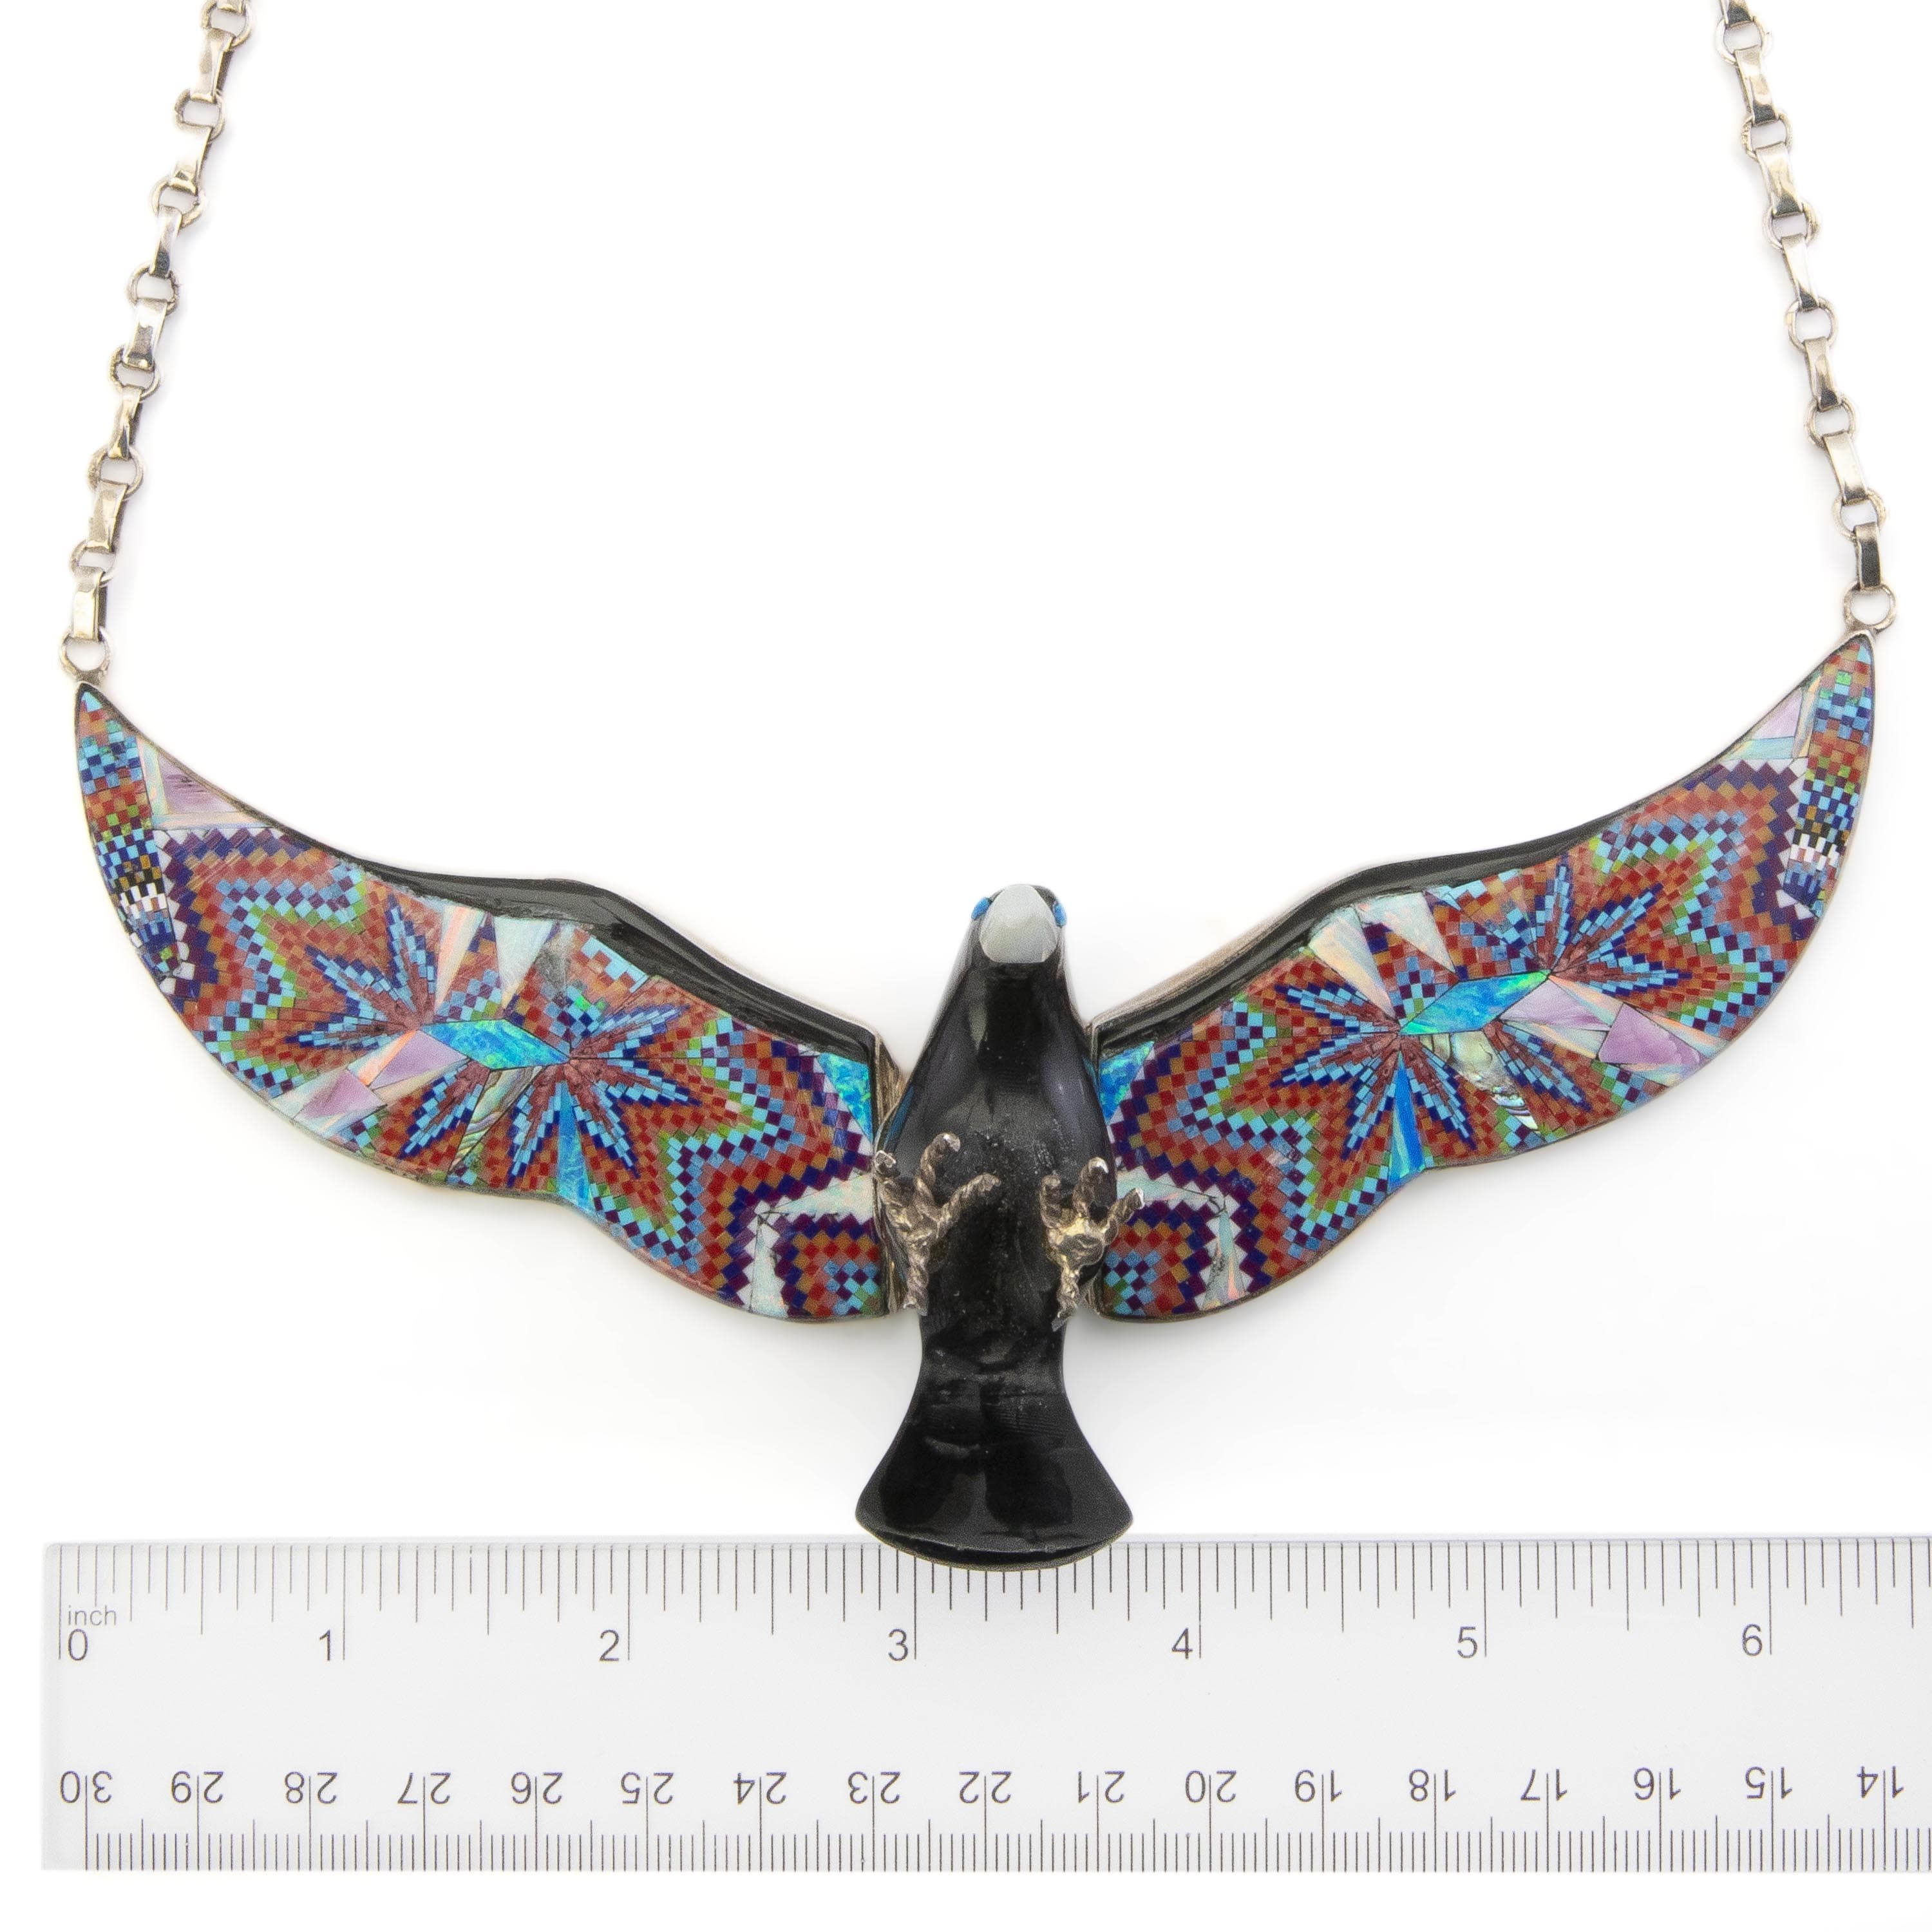 KALIFANO Southwest Silver Jewelry Black Jet Eagle with Multi Gem Opal Micro Inlay Wings Handmade 925 Sterling Silver Necklace AKN2400.001